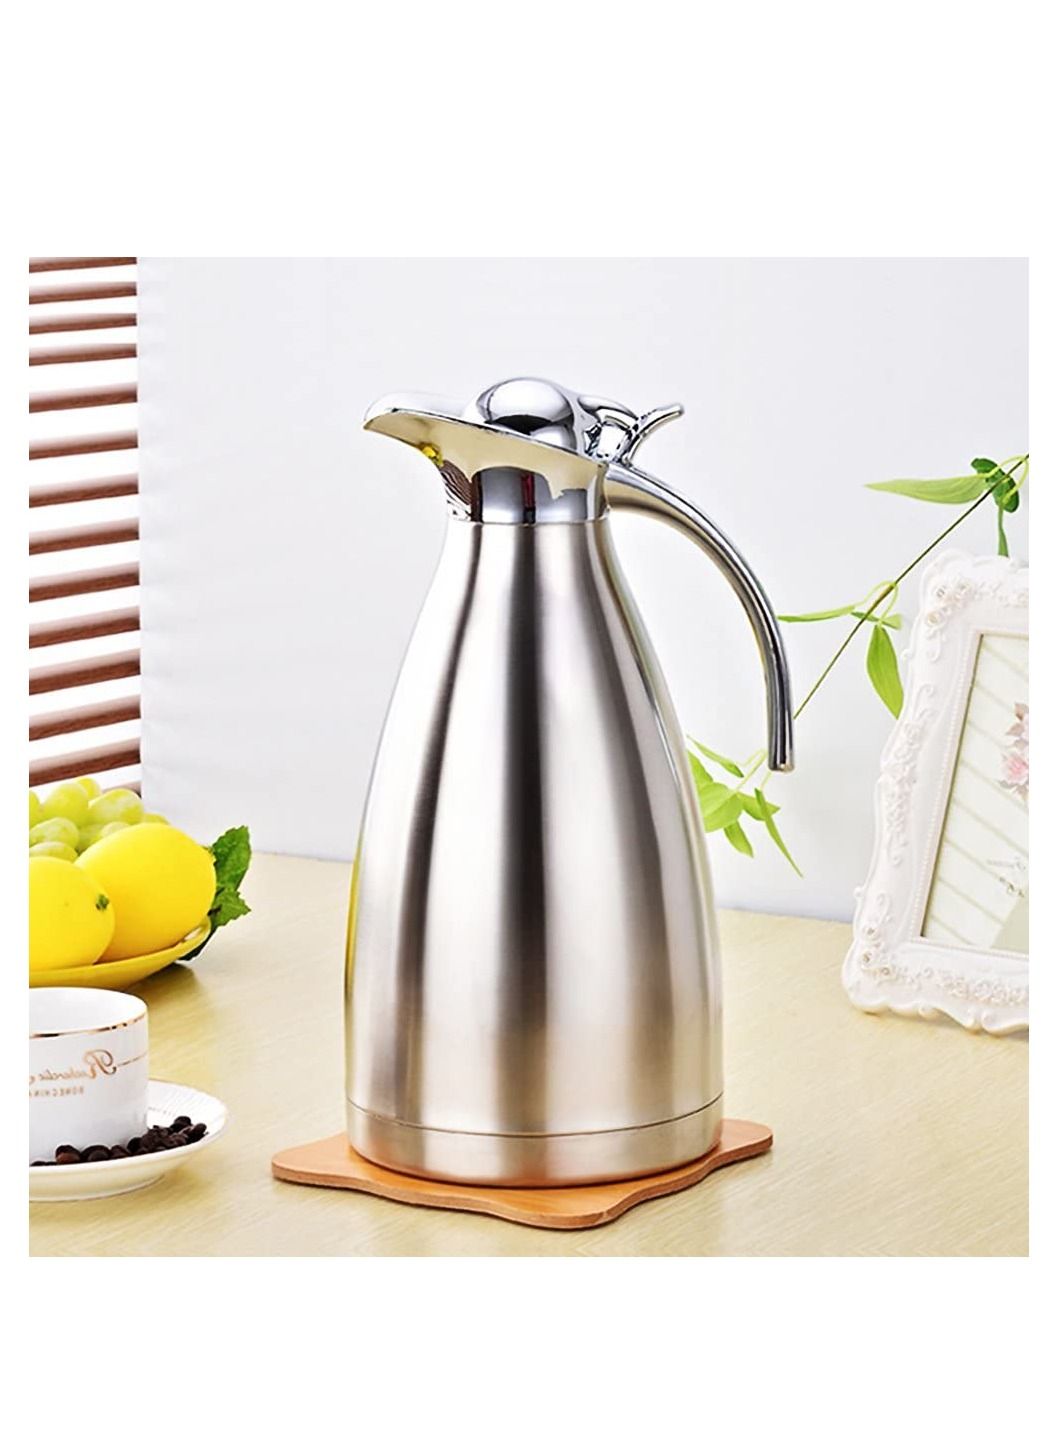 Stainless Steel Vacuum Carafe Double Wall Insulated Coffee Tea Pot With Press Button Lid Vacuum Flask Hot and Cold Water Bottle 1.5L Silver 